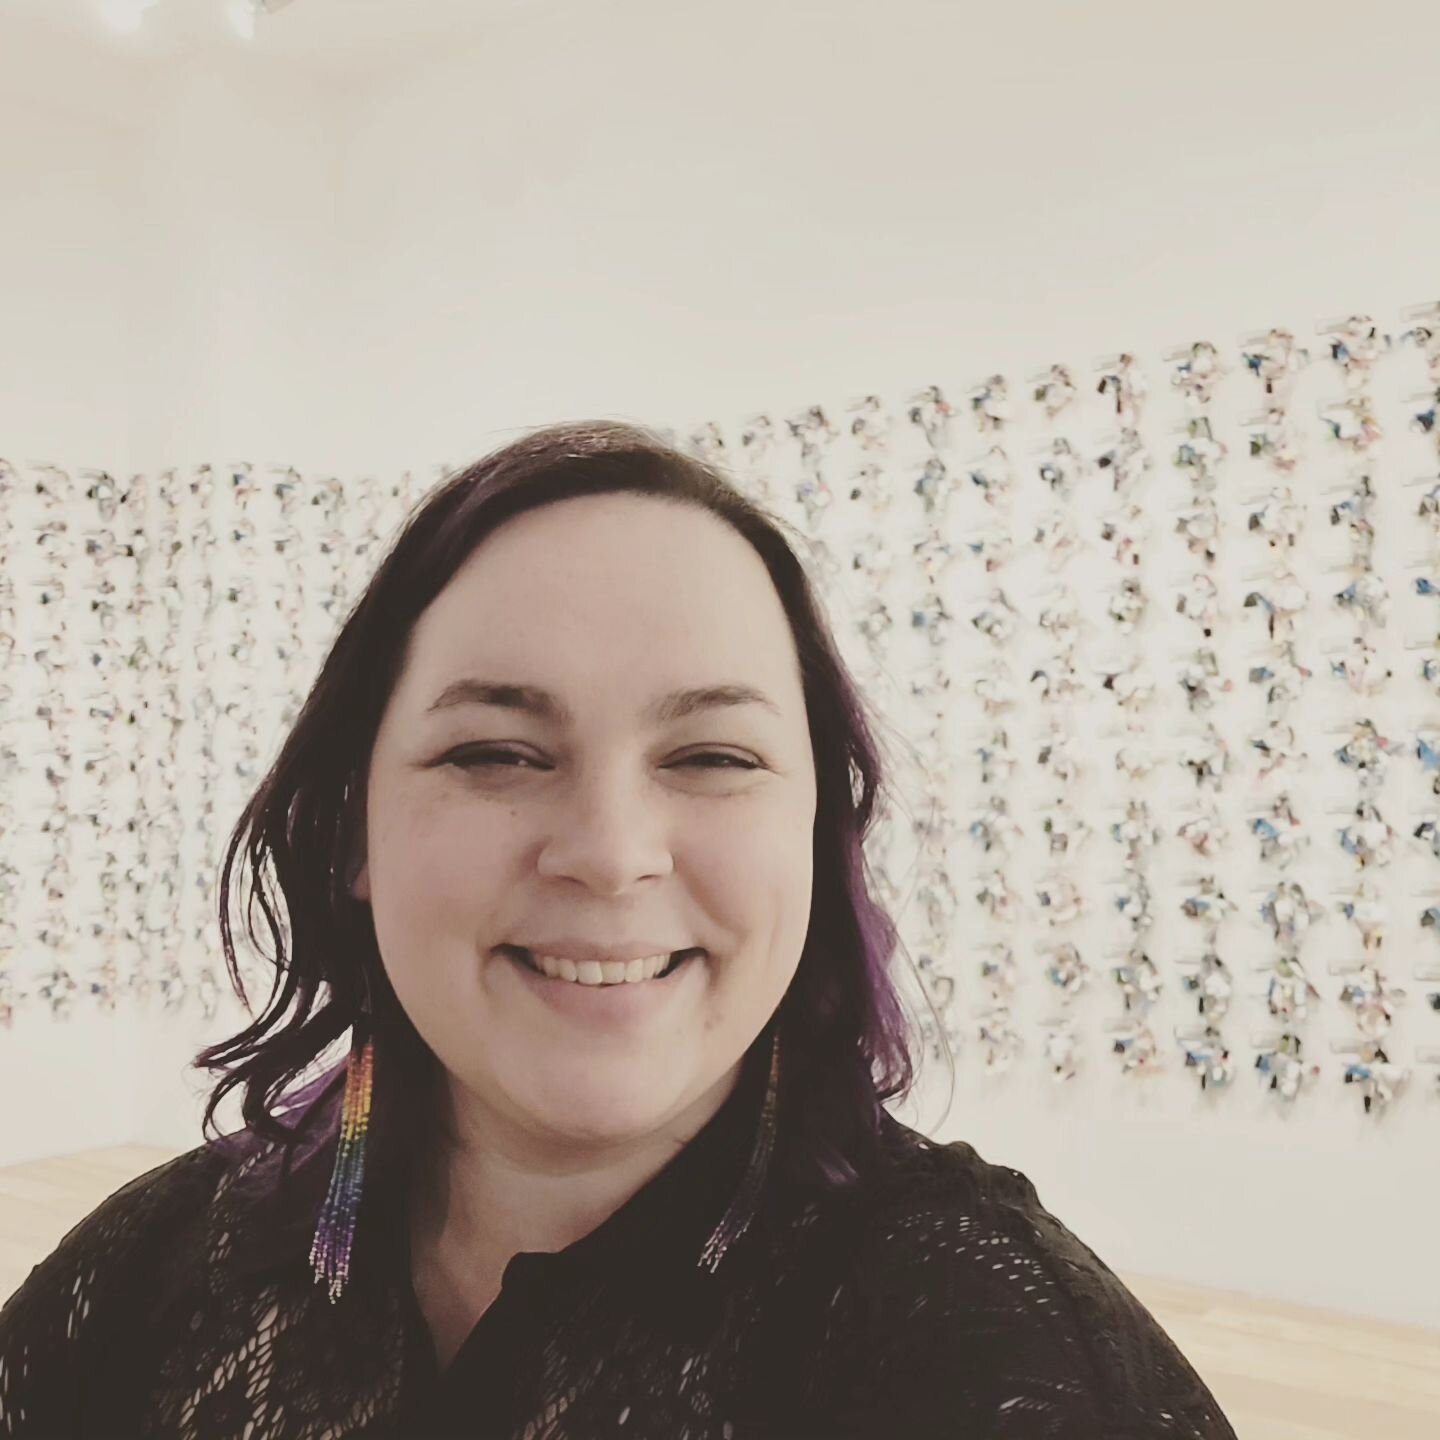 Busy day getting from winnipeg to hamilton for tonights opening, but it was so worth it. Thanks for a great night, @centre3_ #hamiltonart.  Loved my opening, met so many lovely people, and I'm so glad I got to see the art crawl and buy some more art 